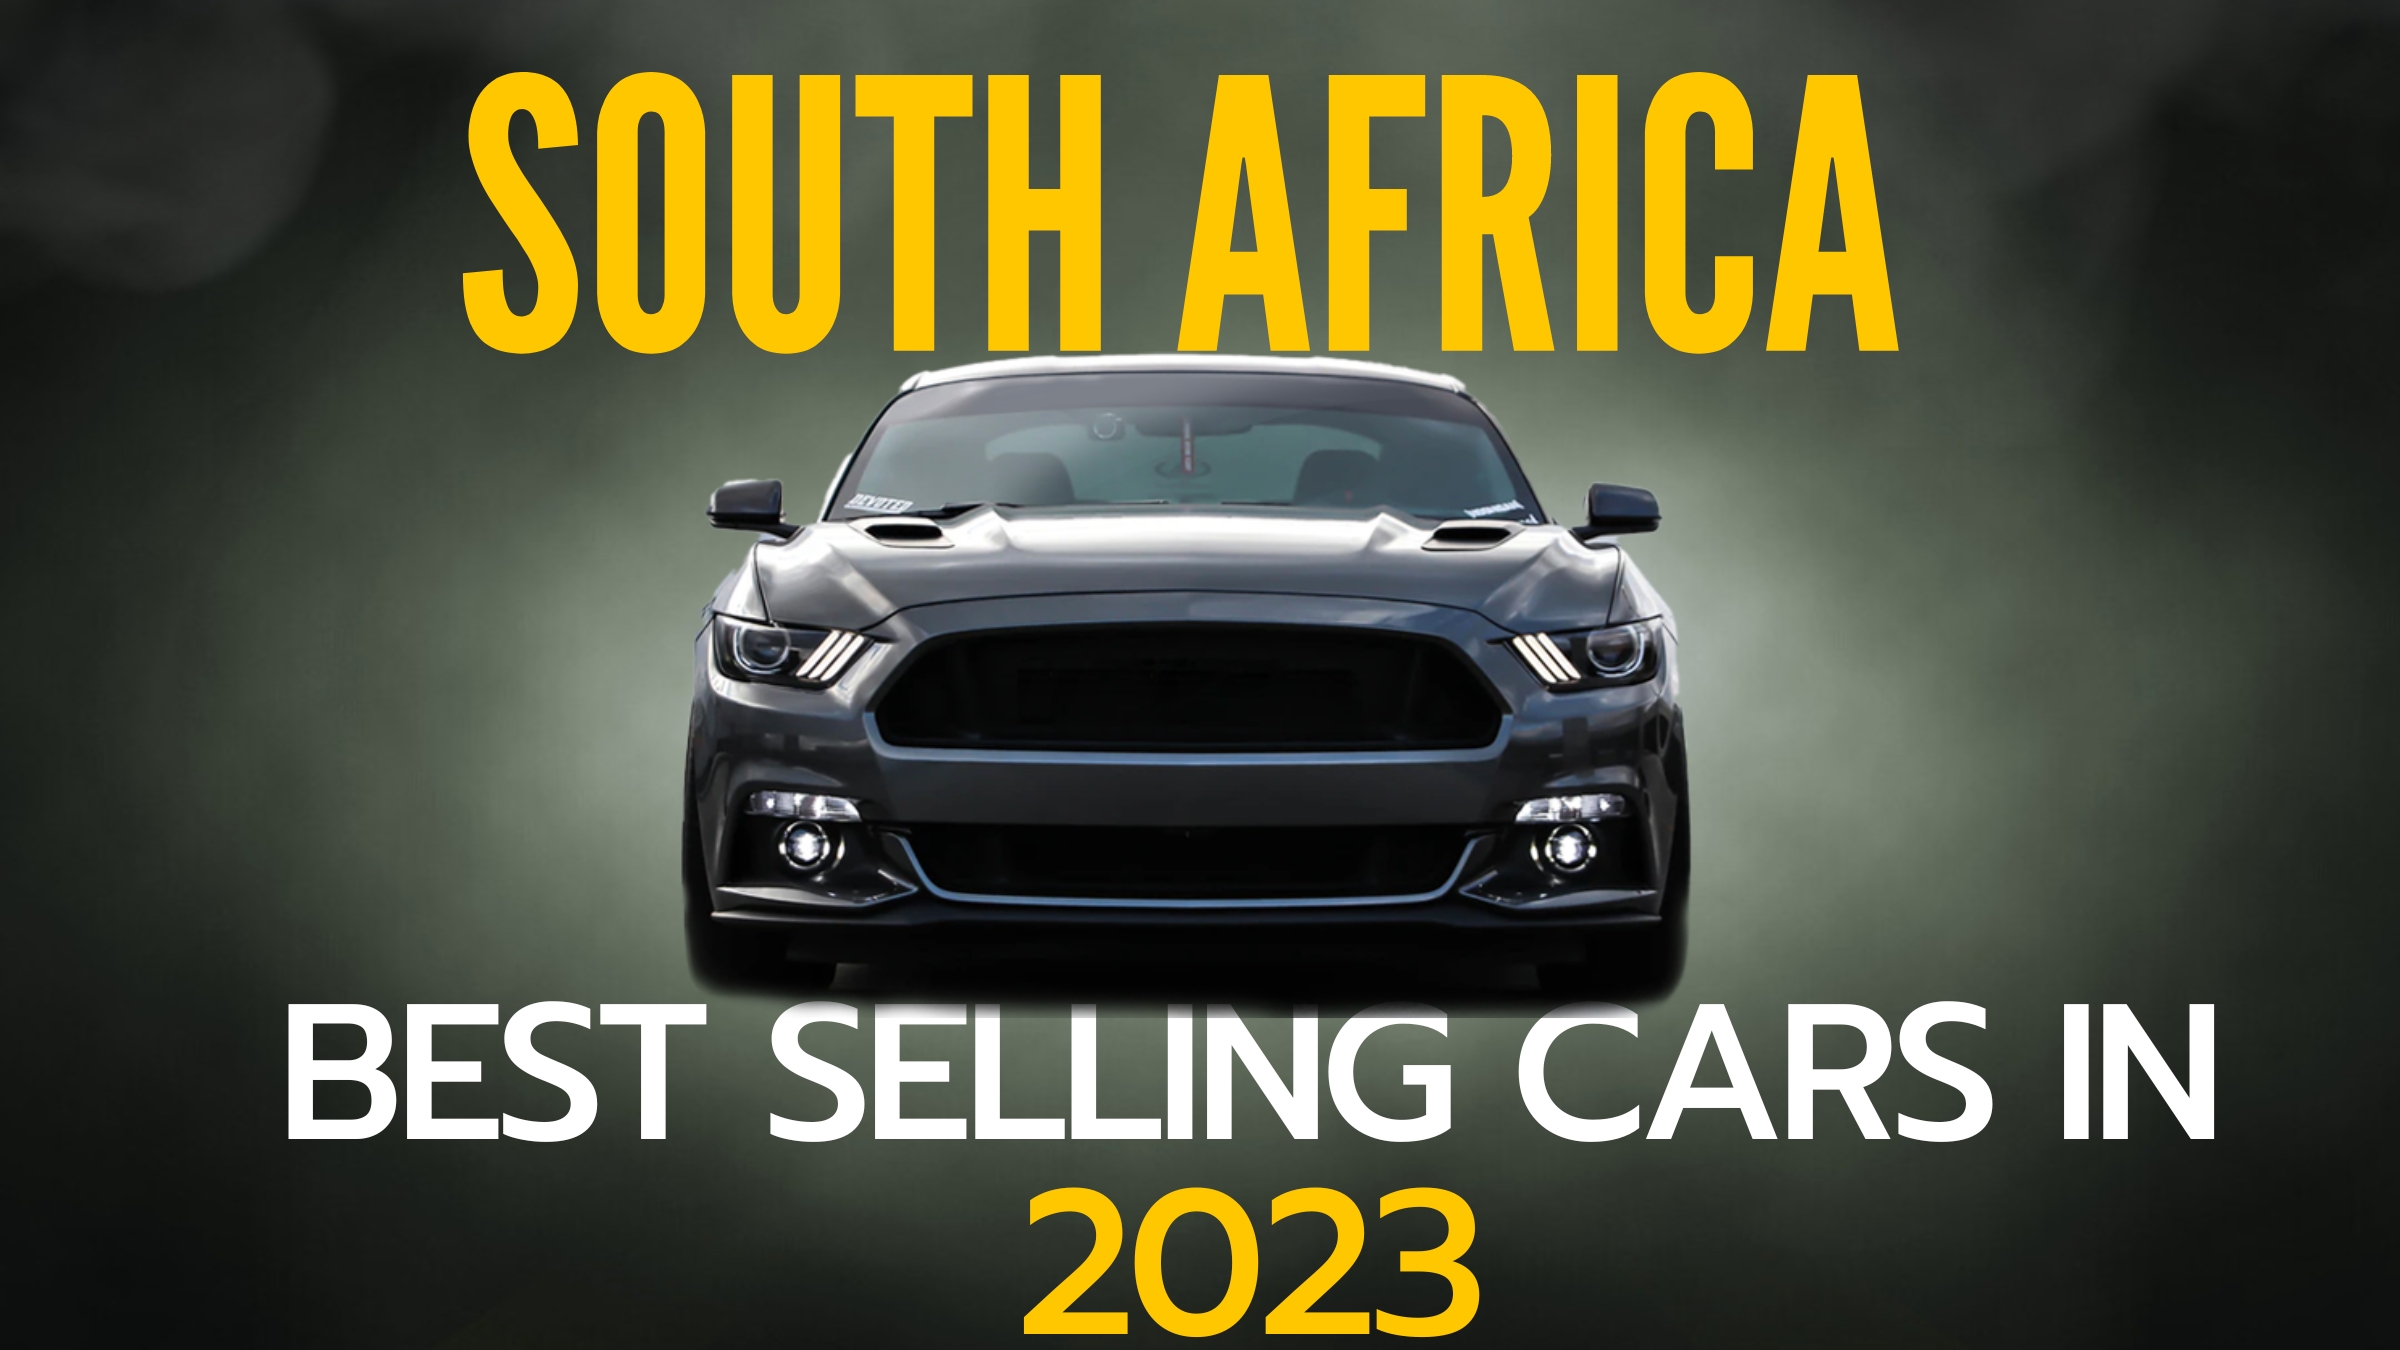 South Africa Best Selling Cars IN 2023